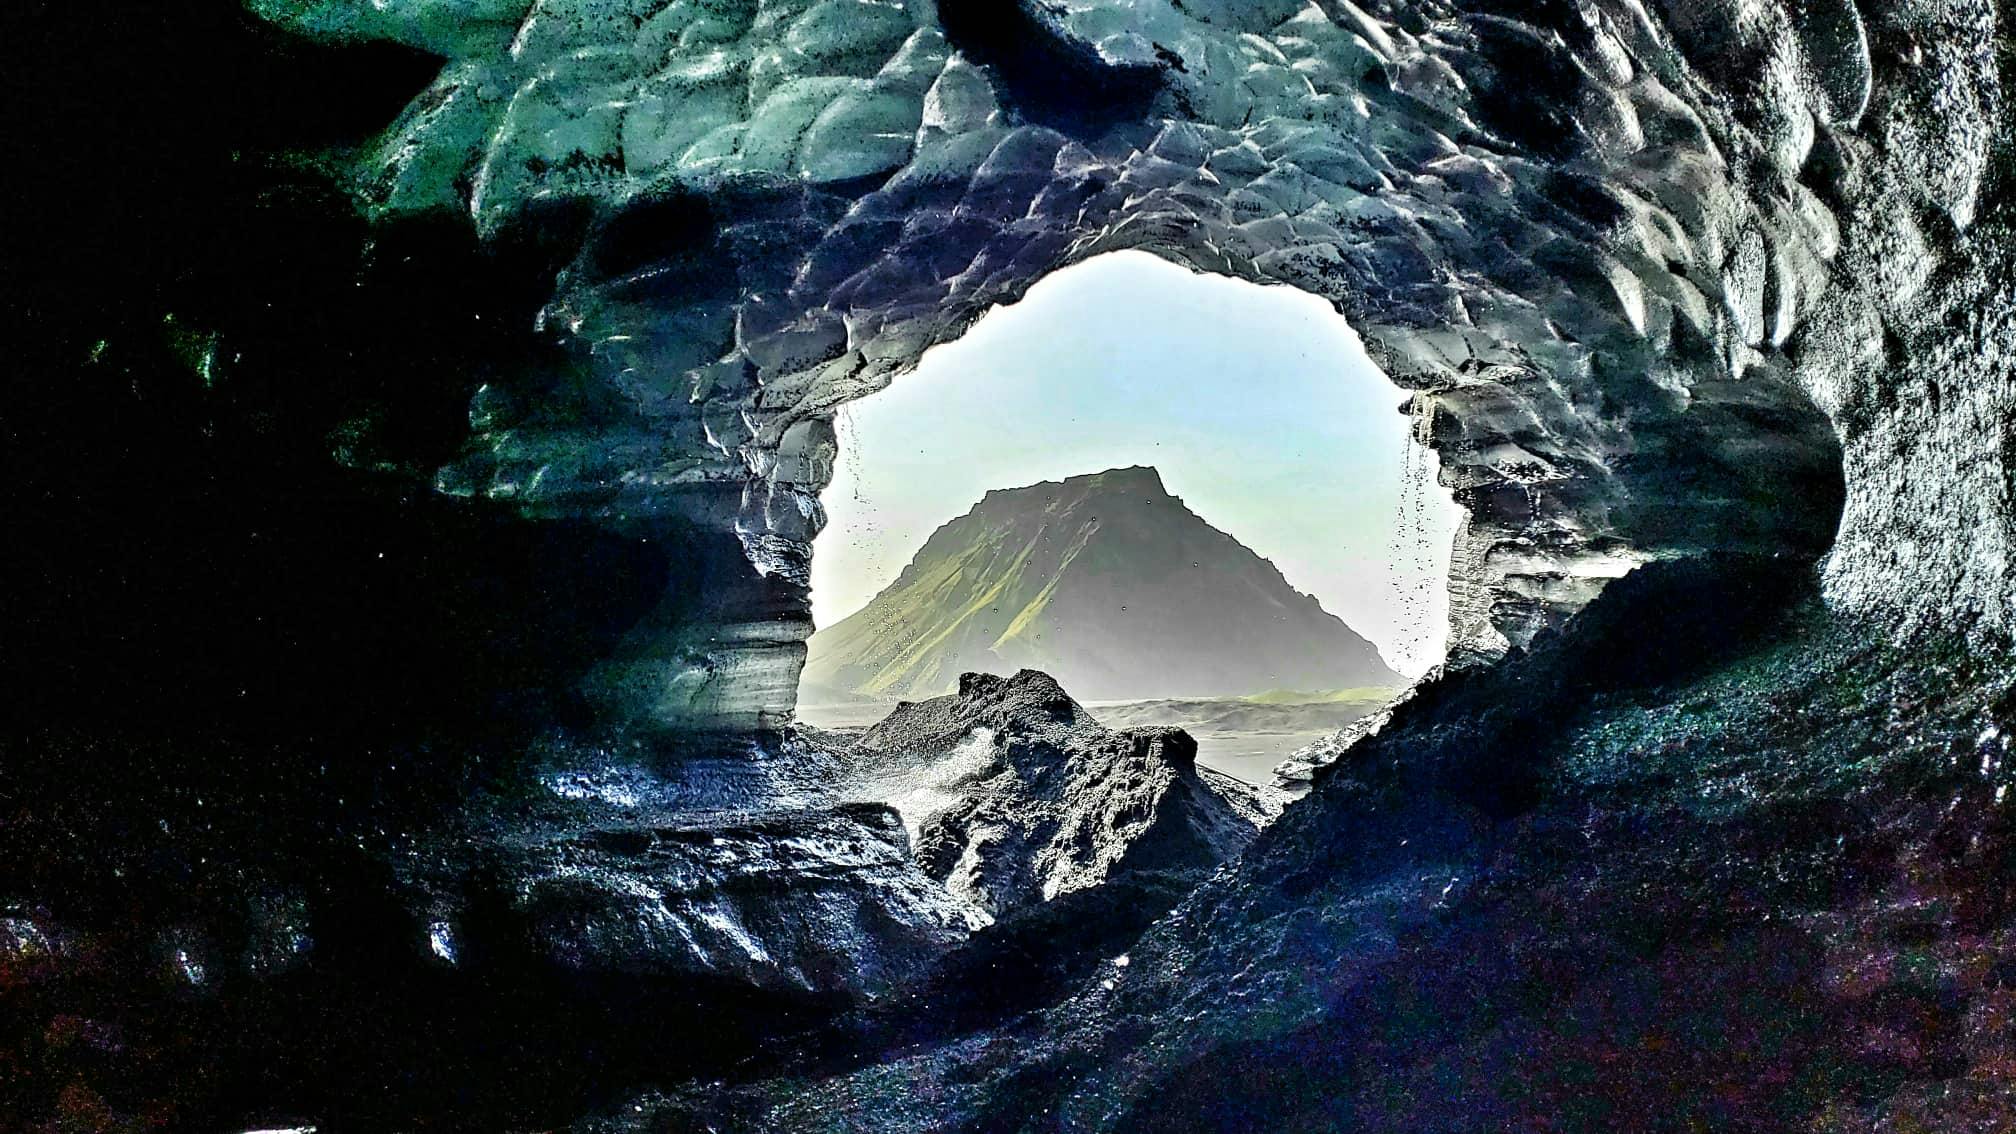 Katla ice cave is one of many ice caves which form naturally in glaciers in Iceland